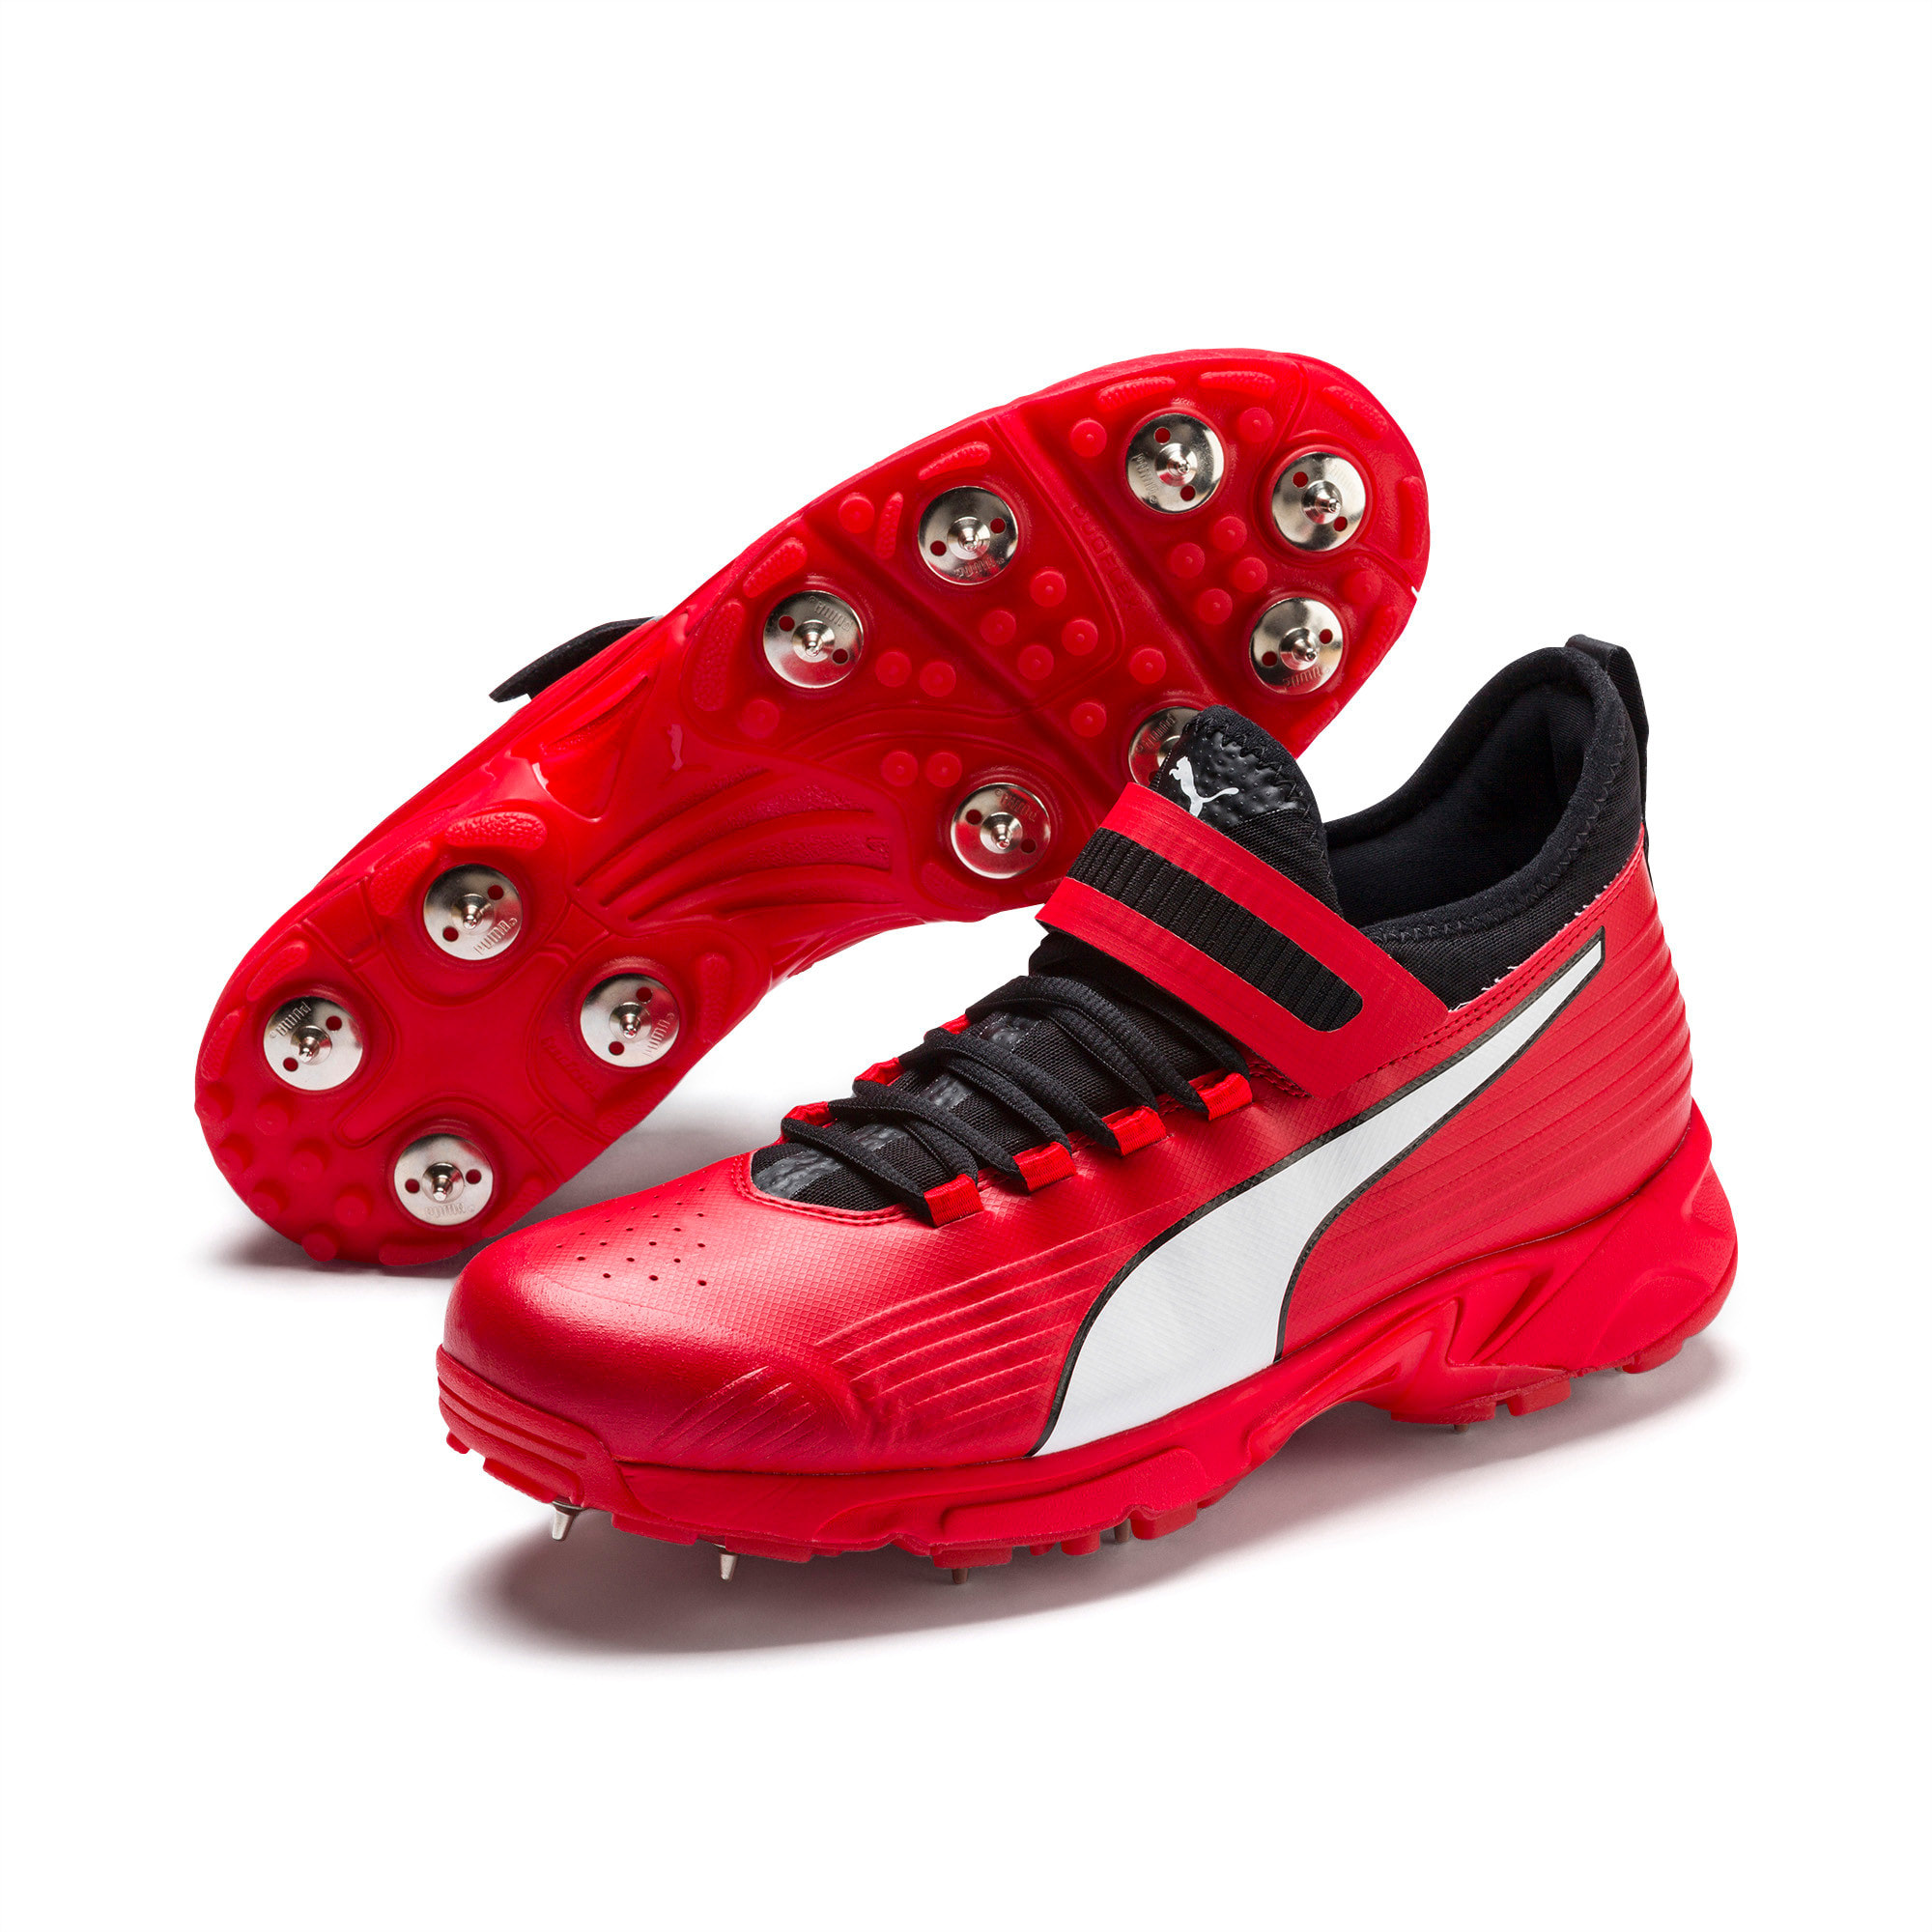 puma shoes in red colour